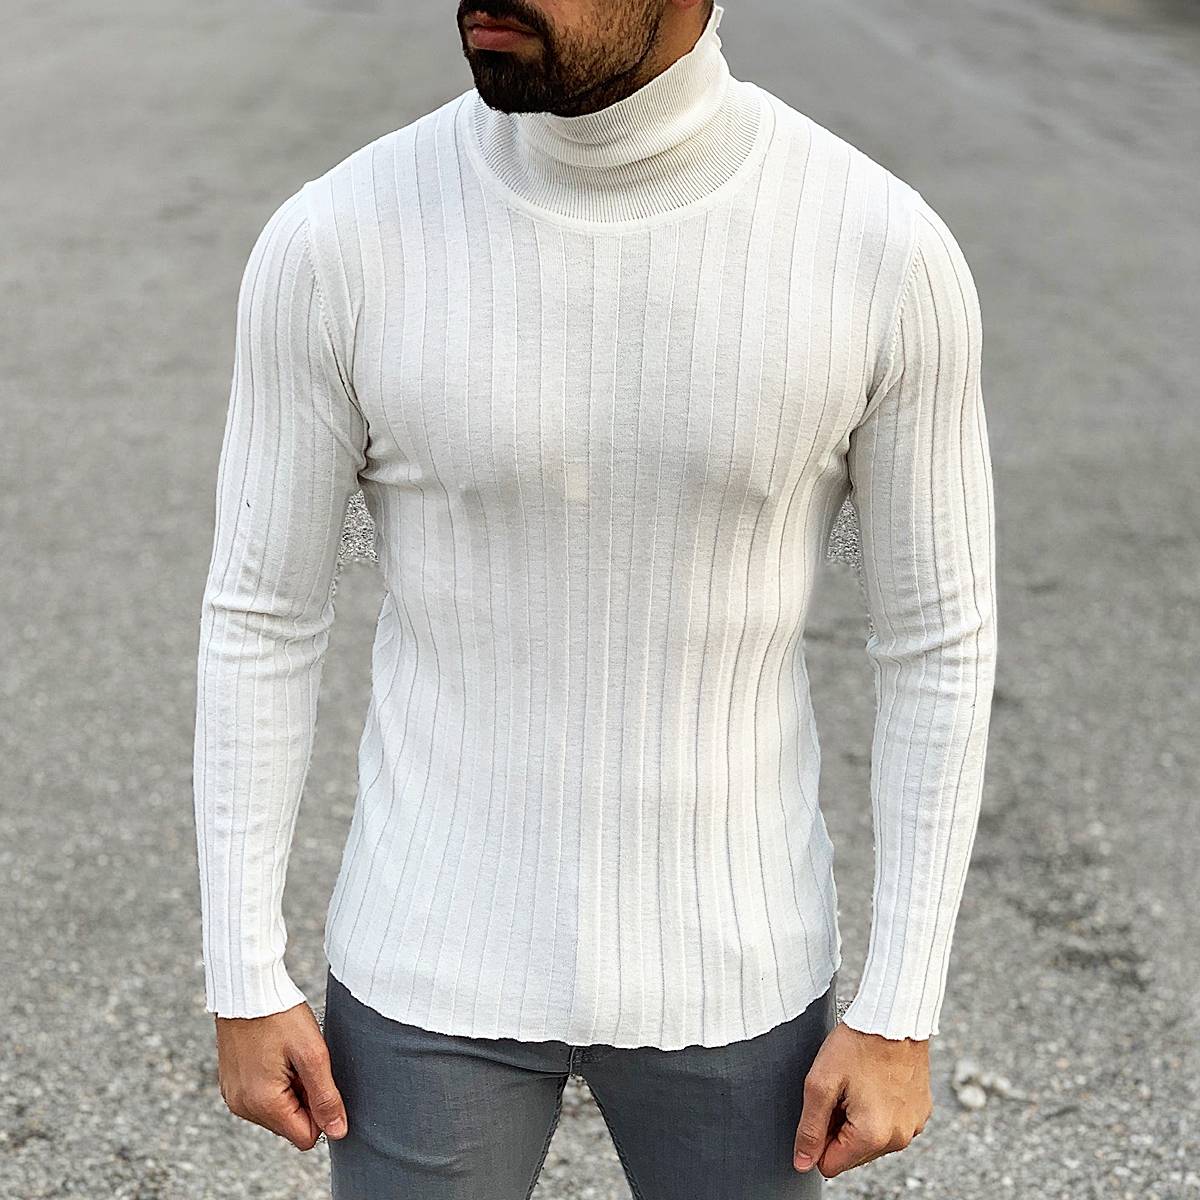 Slimfit Lined Thin Turtle-Neck in White